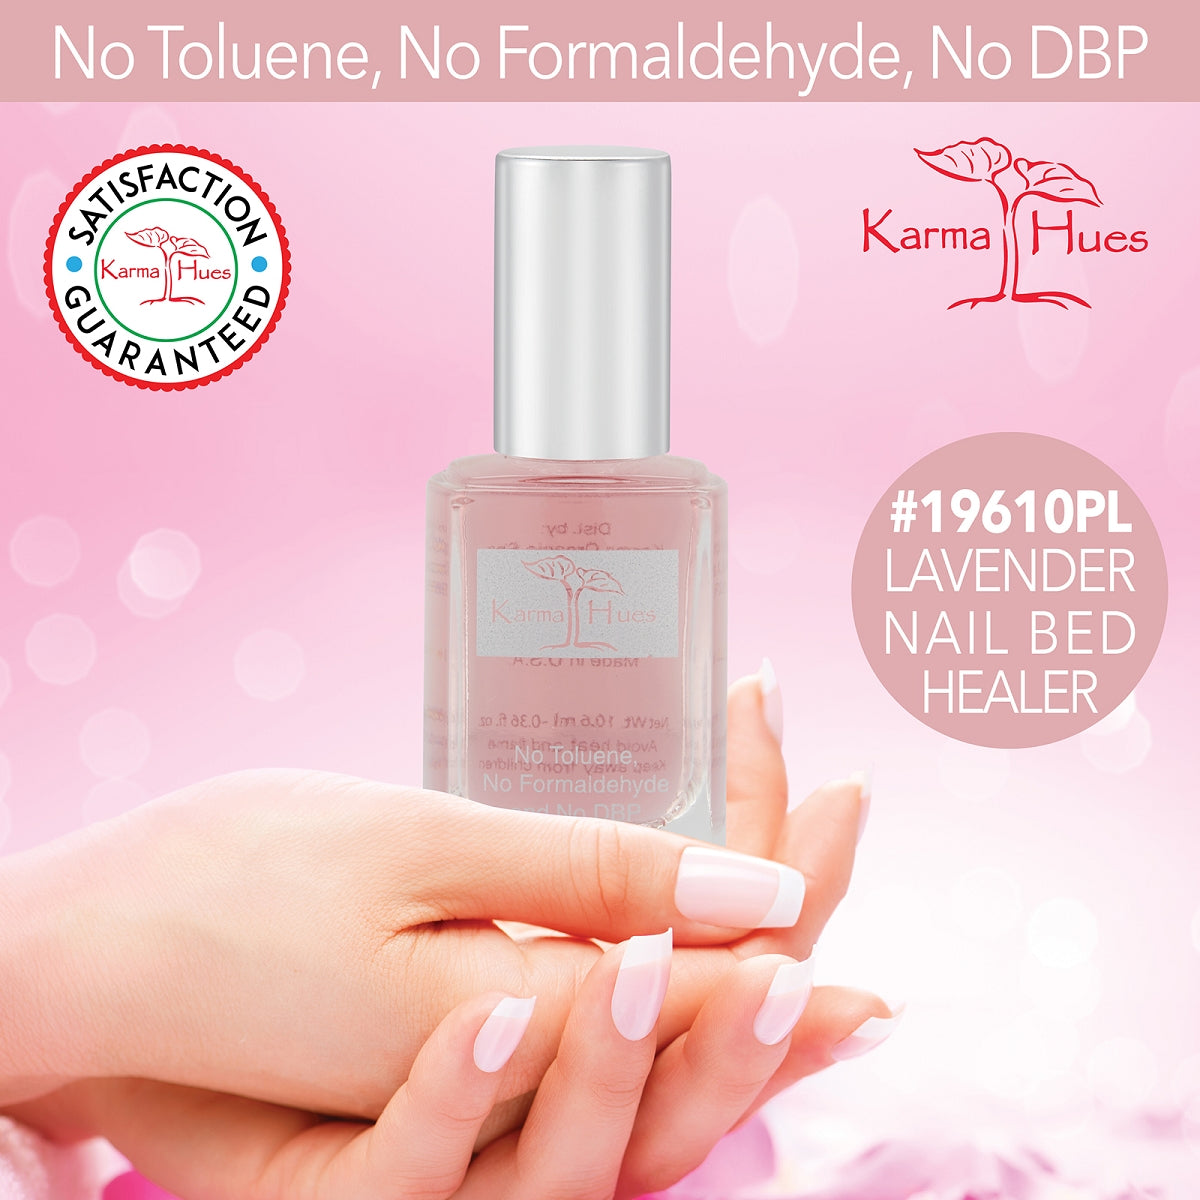 Lavender RX Nailbed Healer - Non-Toxic, Vegan, and Cruelty-Free (#19610PL)